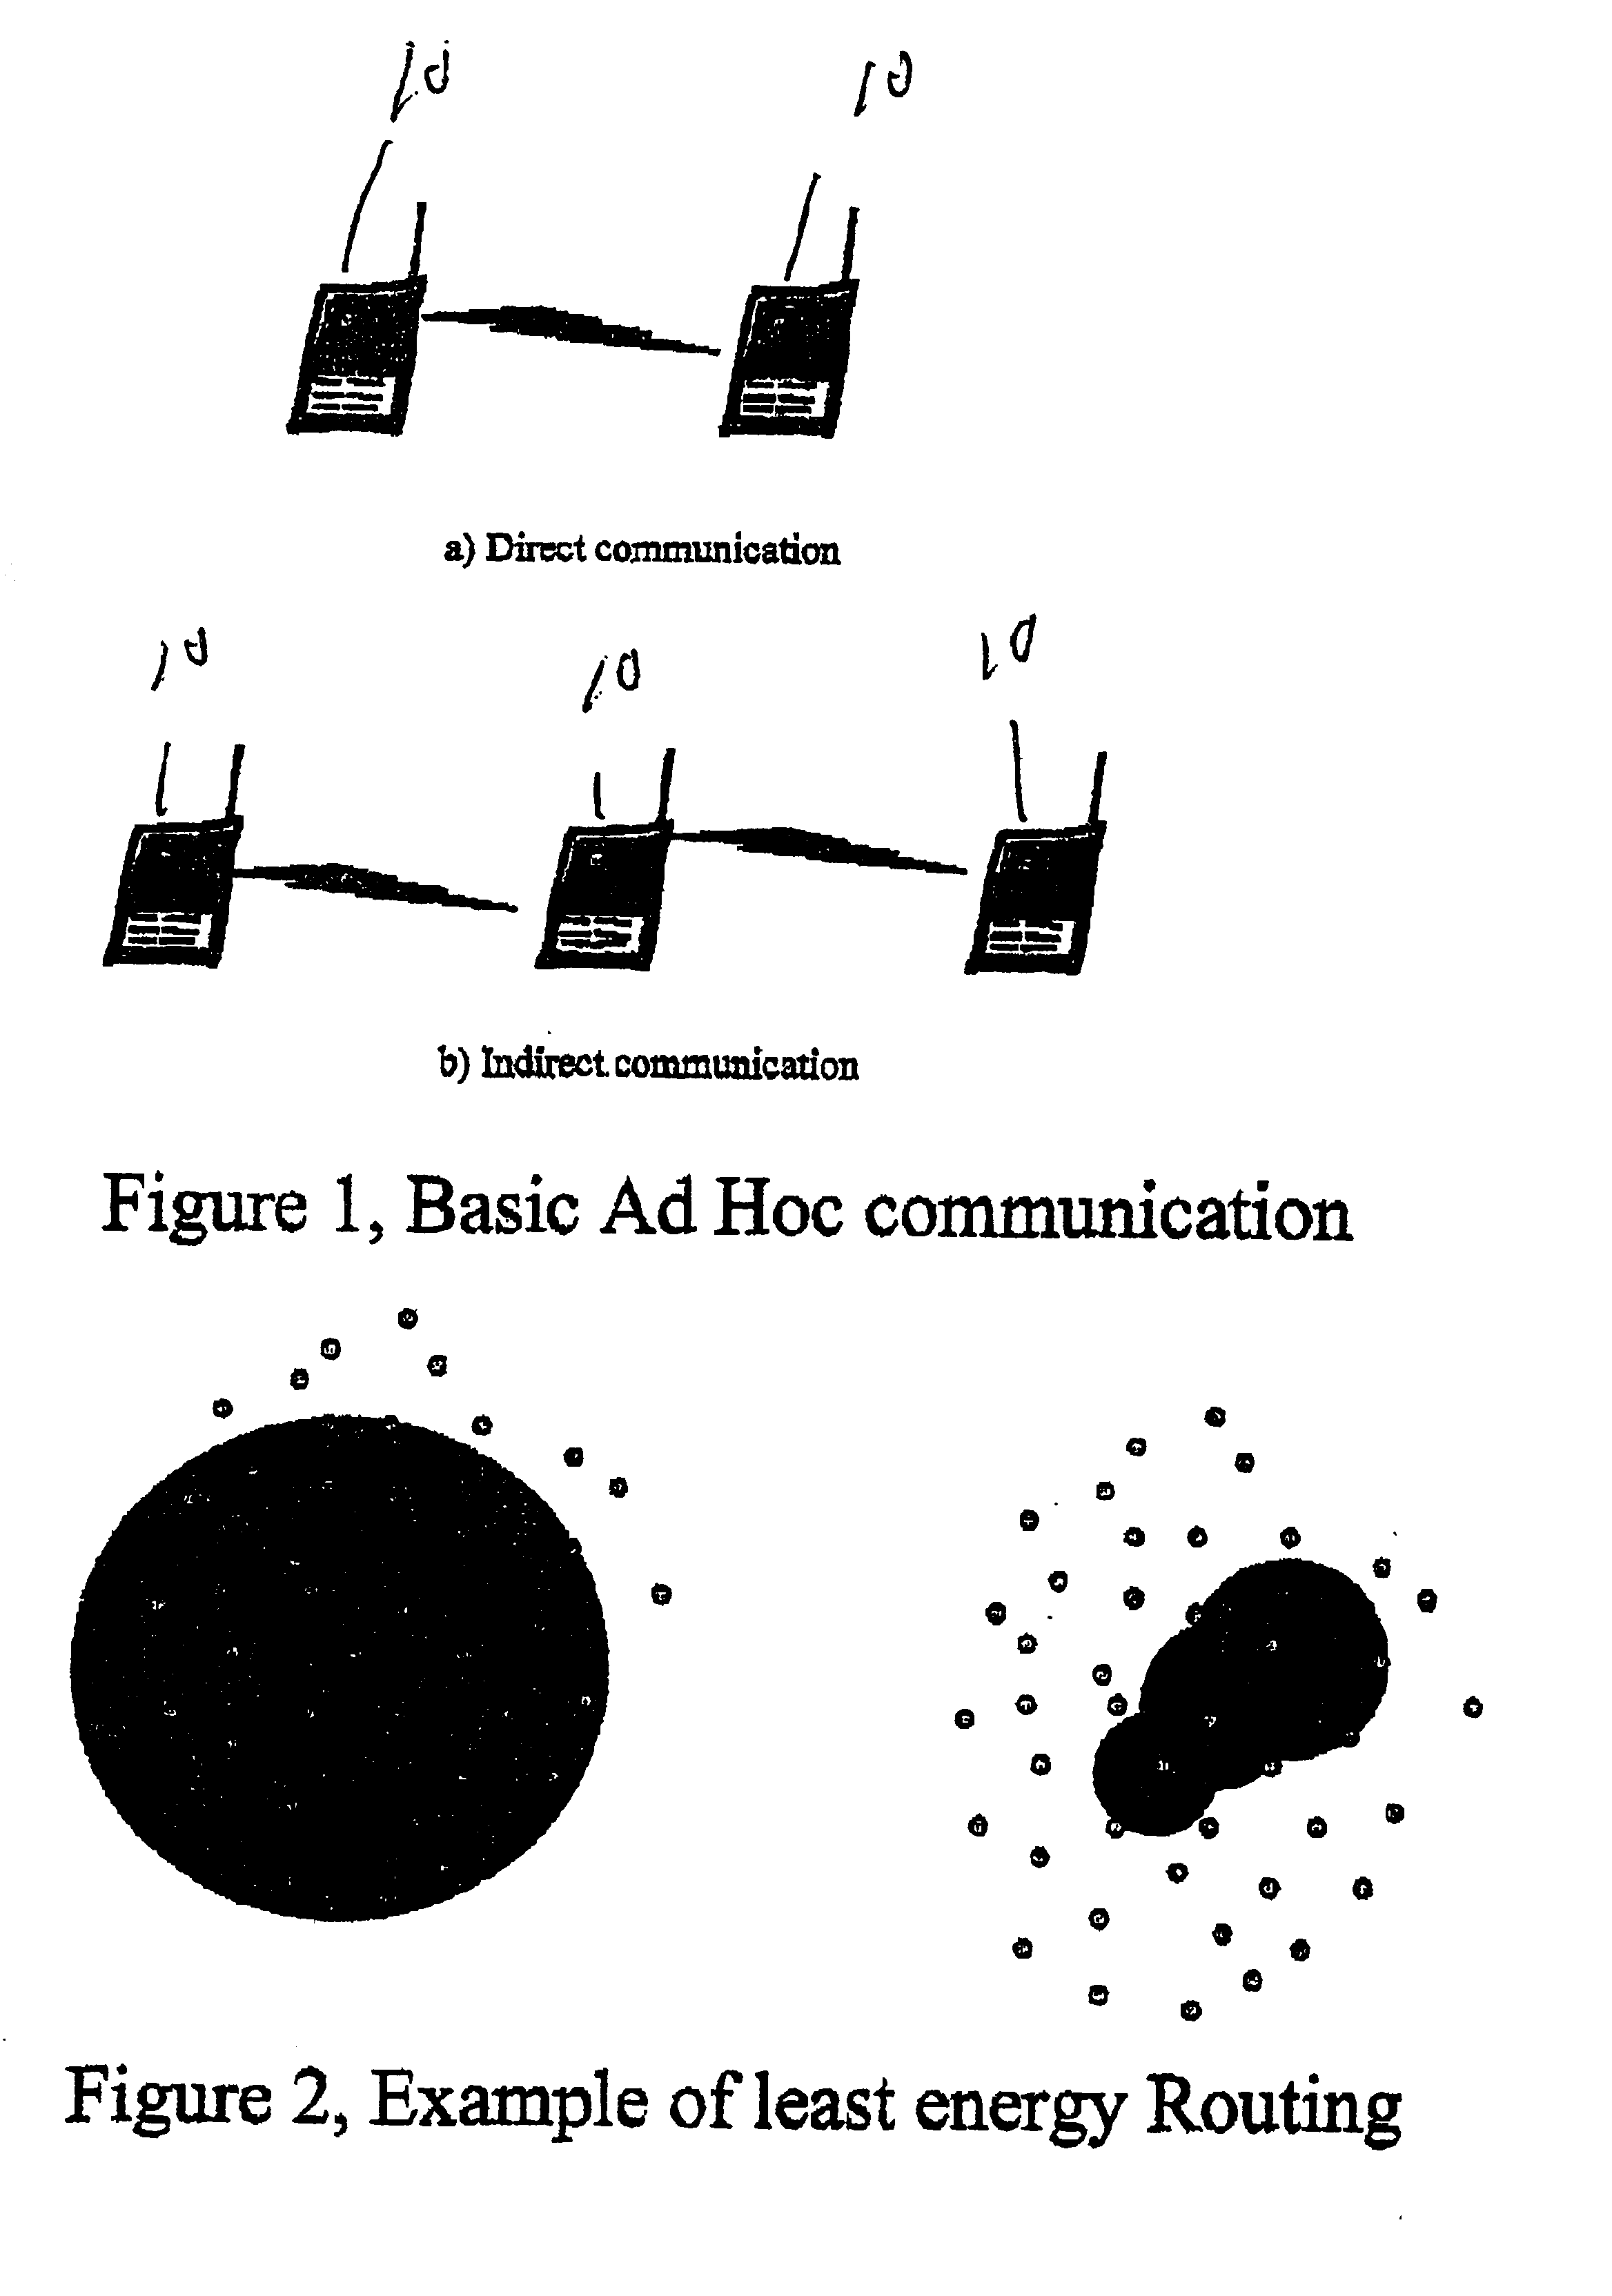 Prioritized-routing for an ad-hoc, peer-to-peer, mobile radio access system